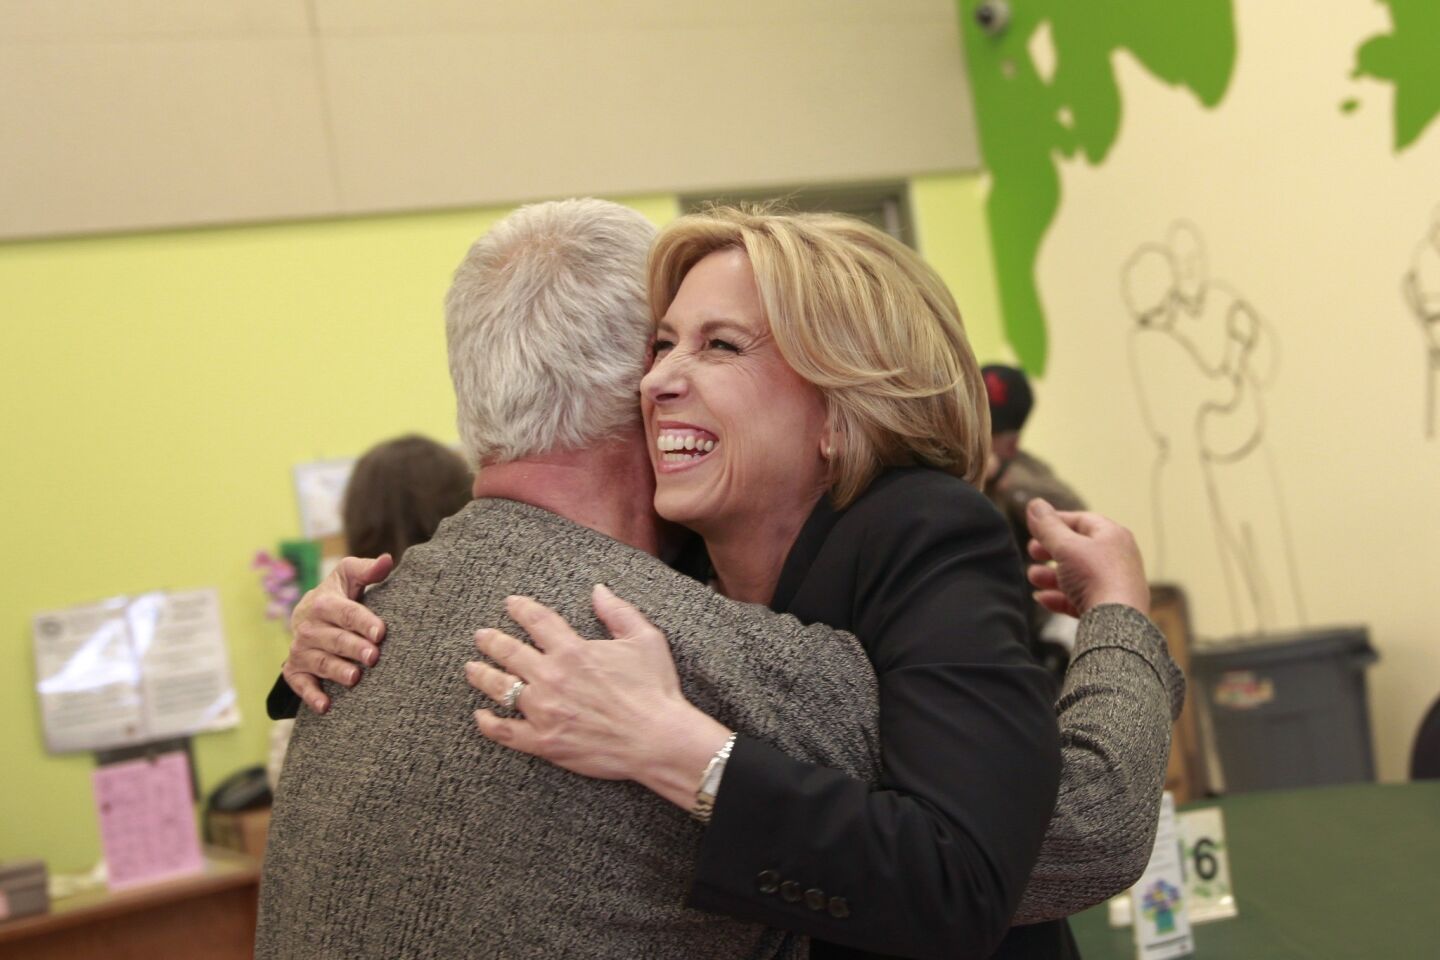 Mayoral candidate Wendy Greuel gets a hug during a campaign stop at the Sherman Oaks/East Valley Adult Center.